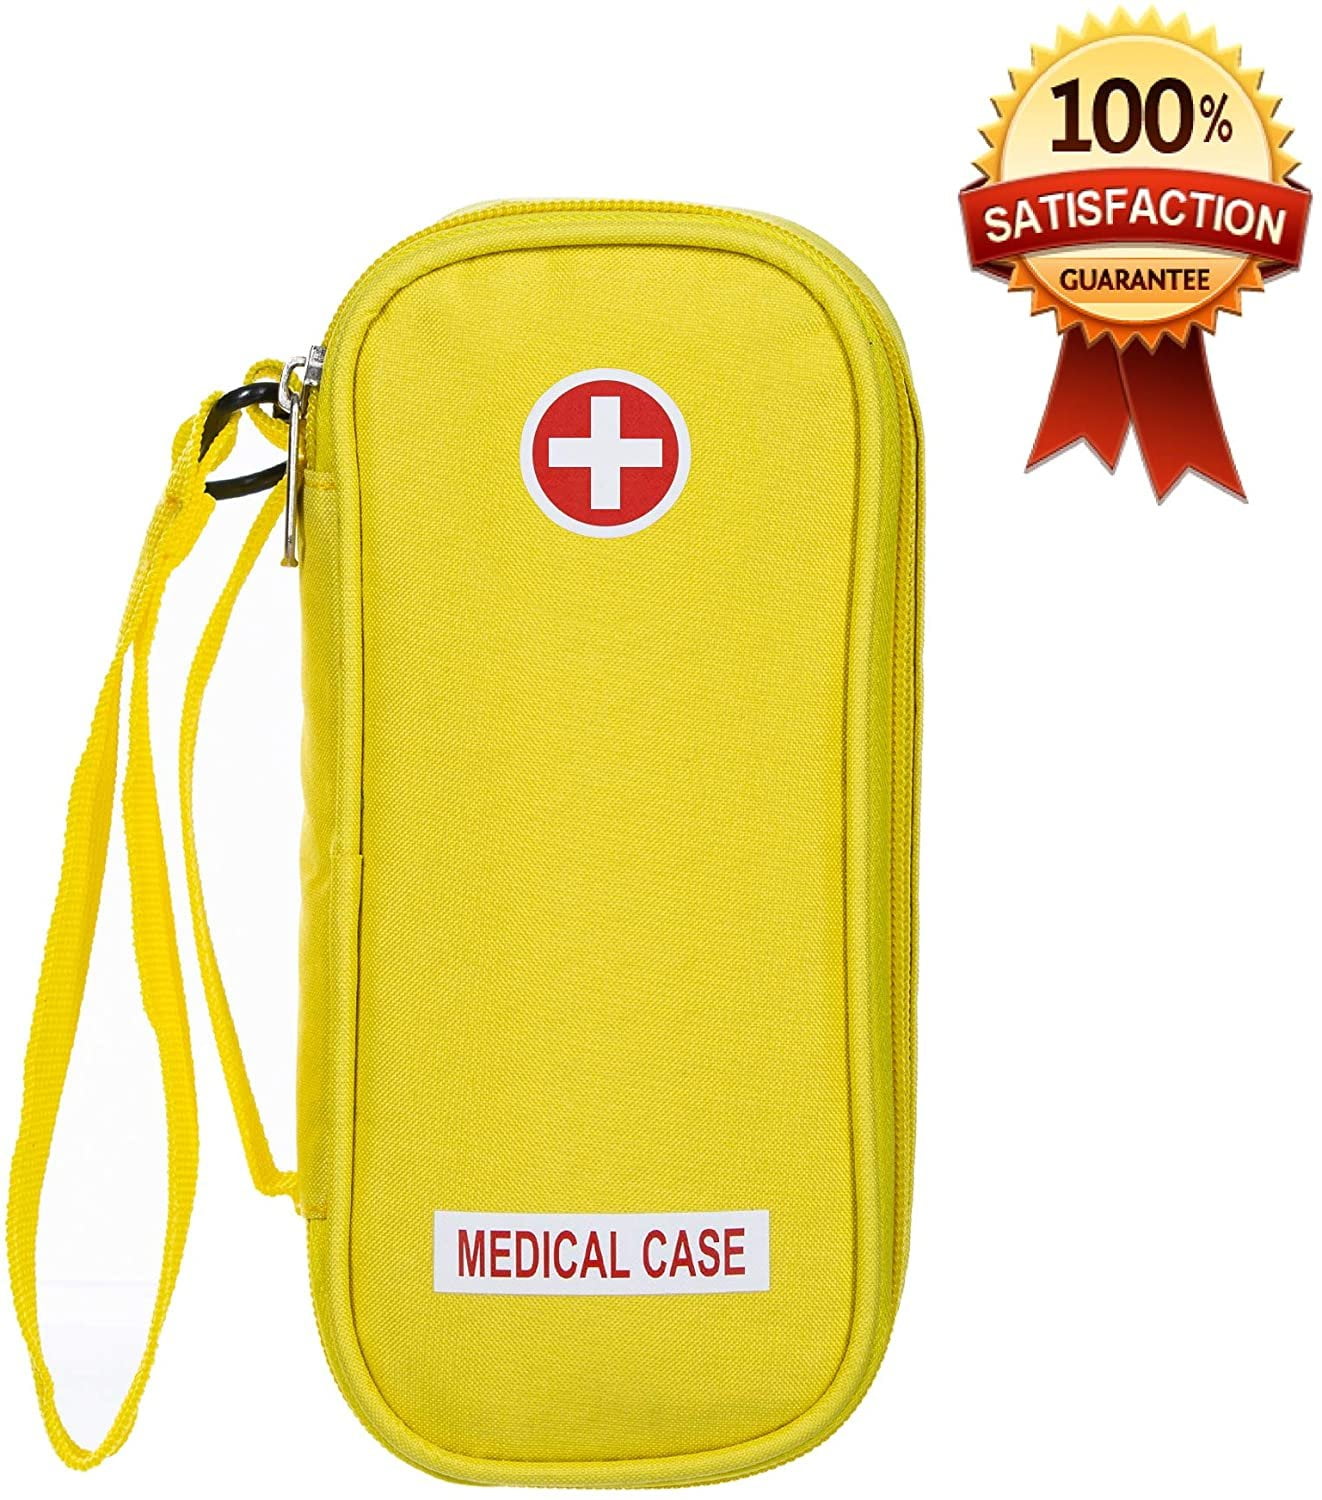 Kid's EpiPen Carrying Medical Case – Yellow Insulated Portable Bag with  Zipper – For 2 EpiPen's, AUVI-Q, Asthma Inhaler, Eye Drops, Allergy  Medicine - Walmart.com